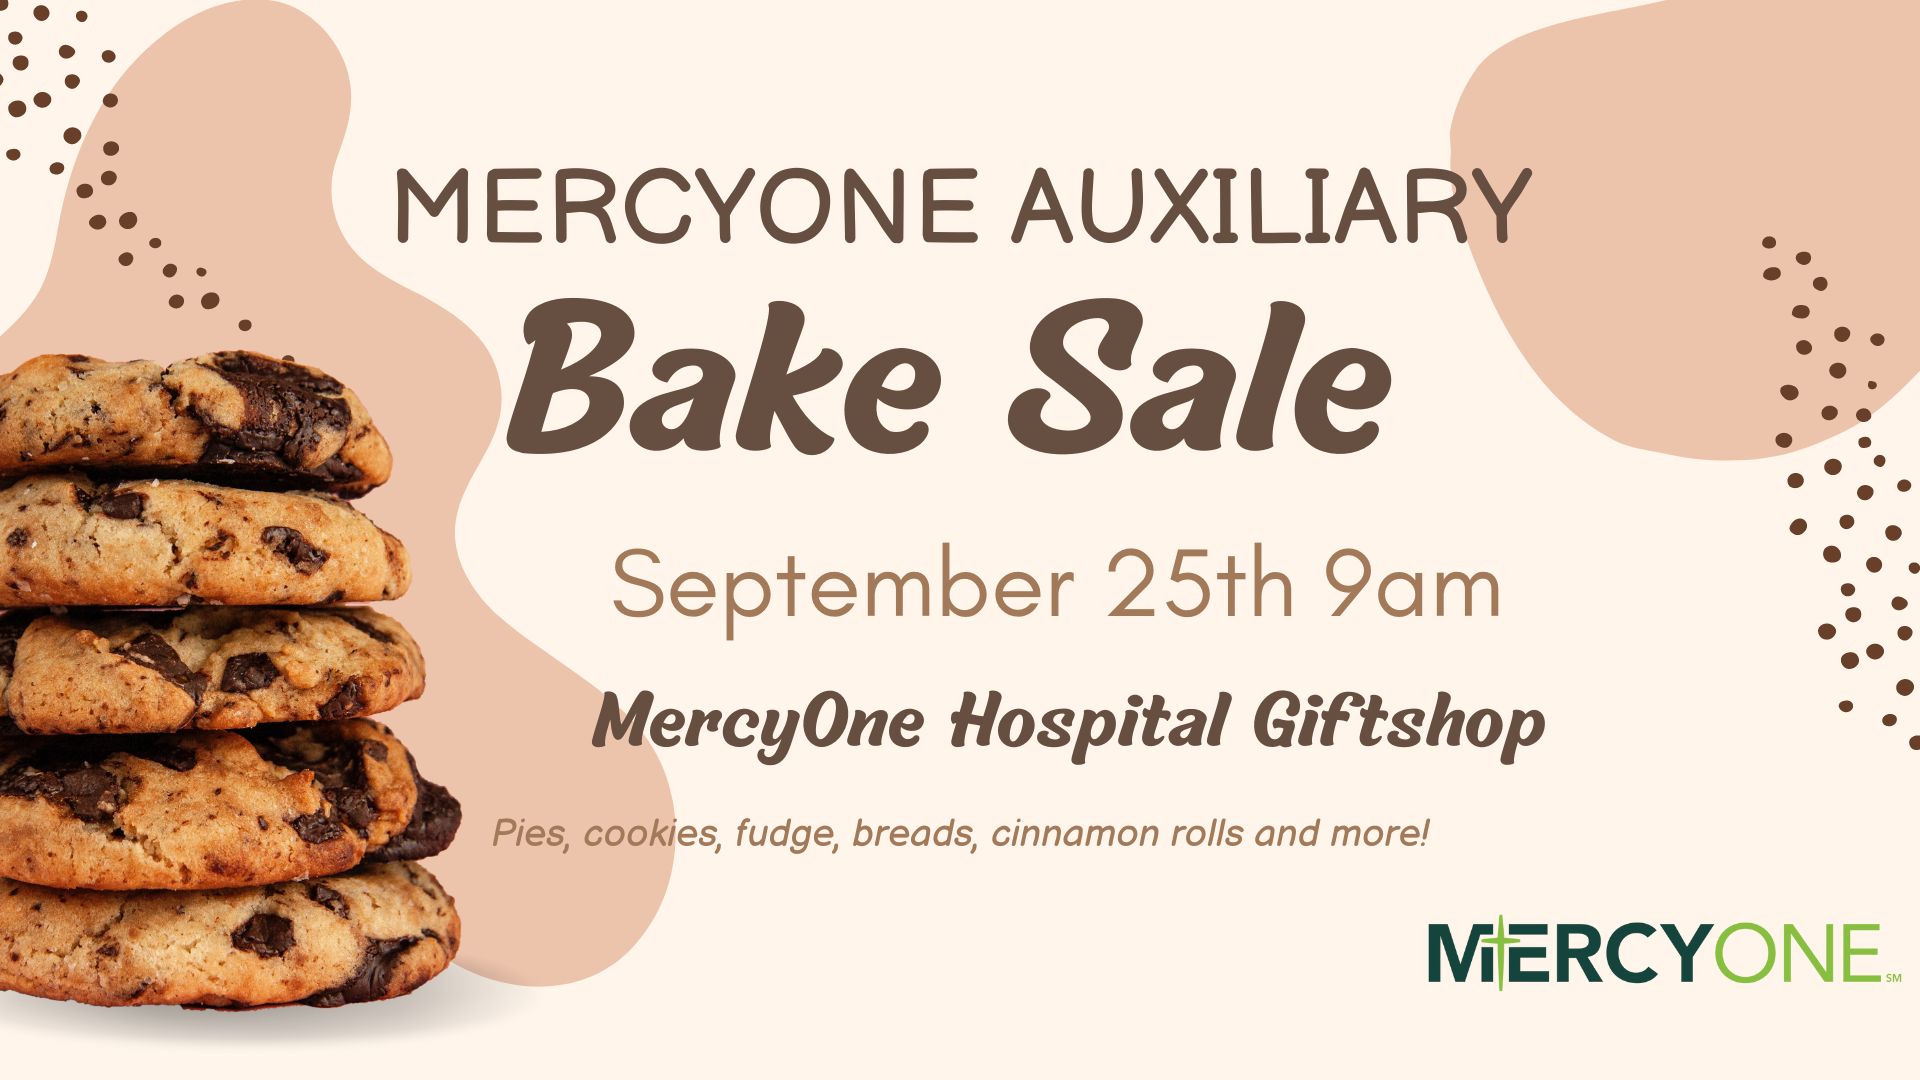 MercyOne Auxiliary Bake Sale September 25th